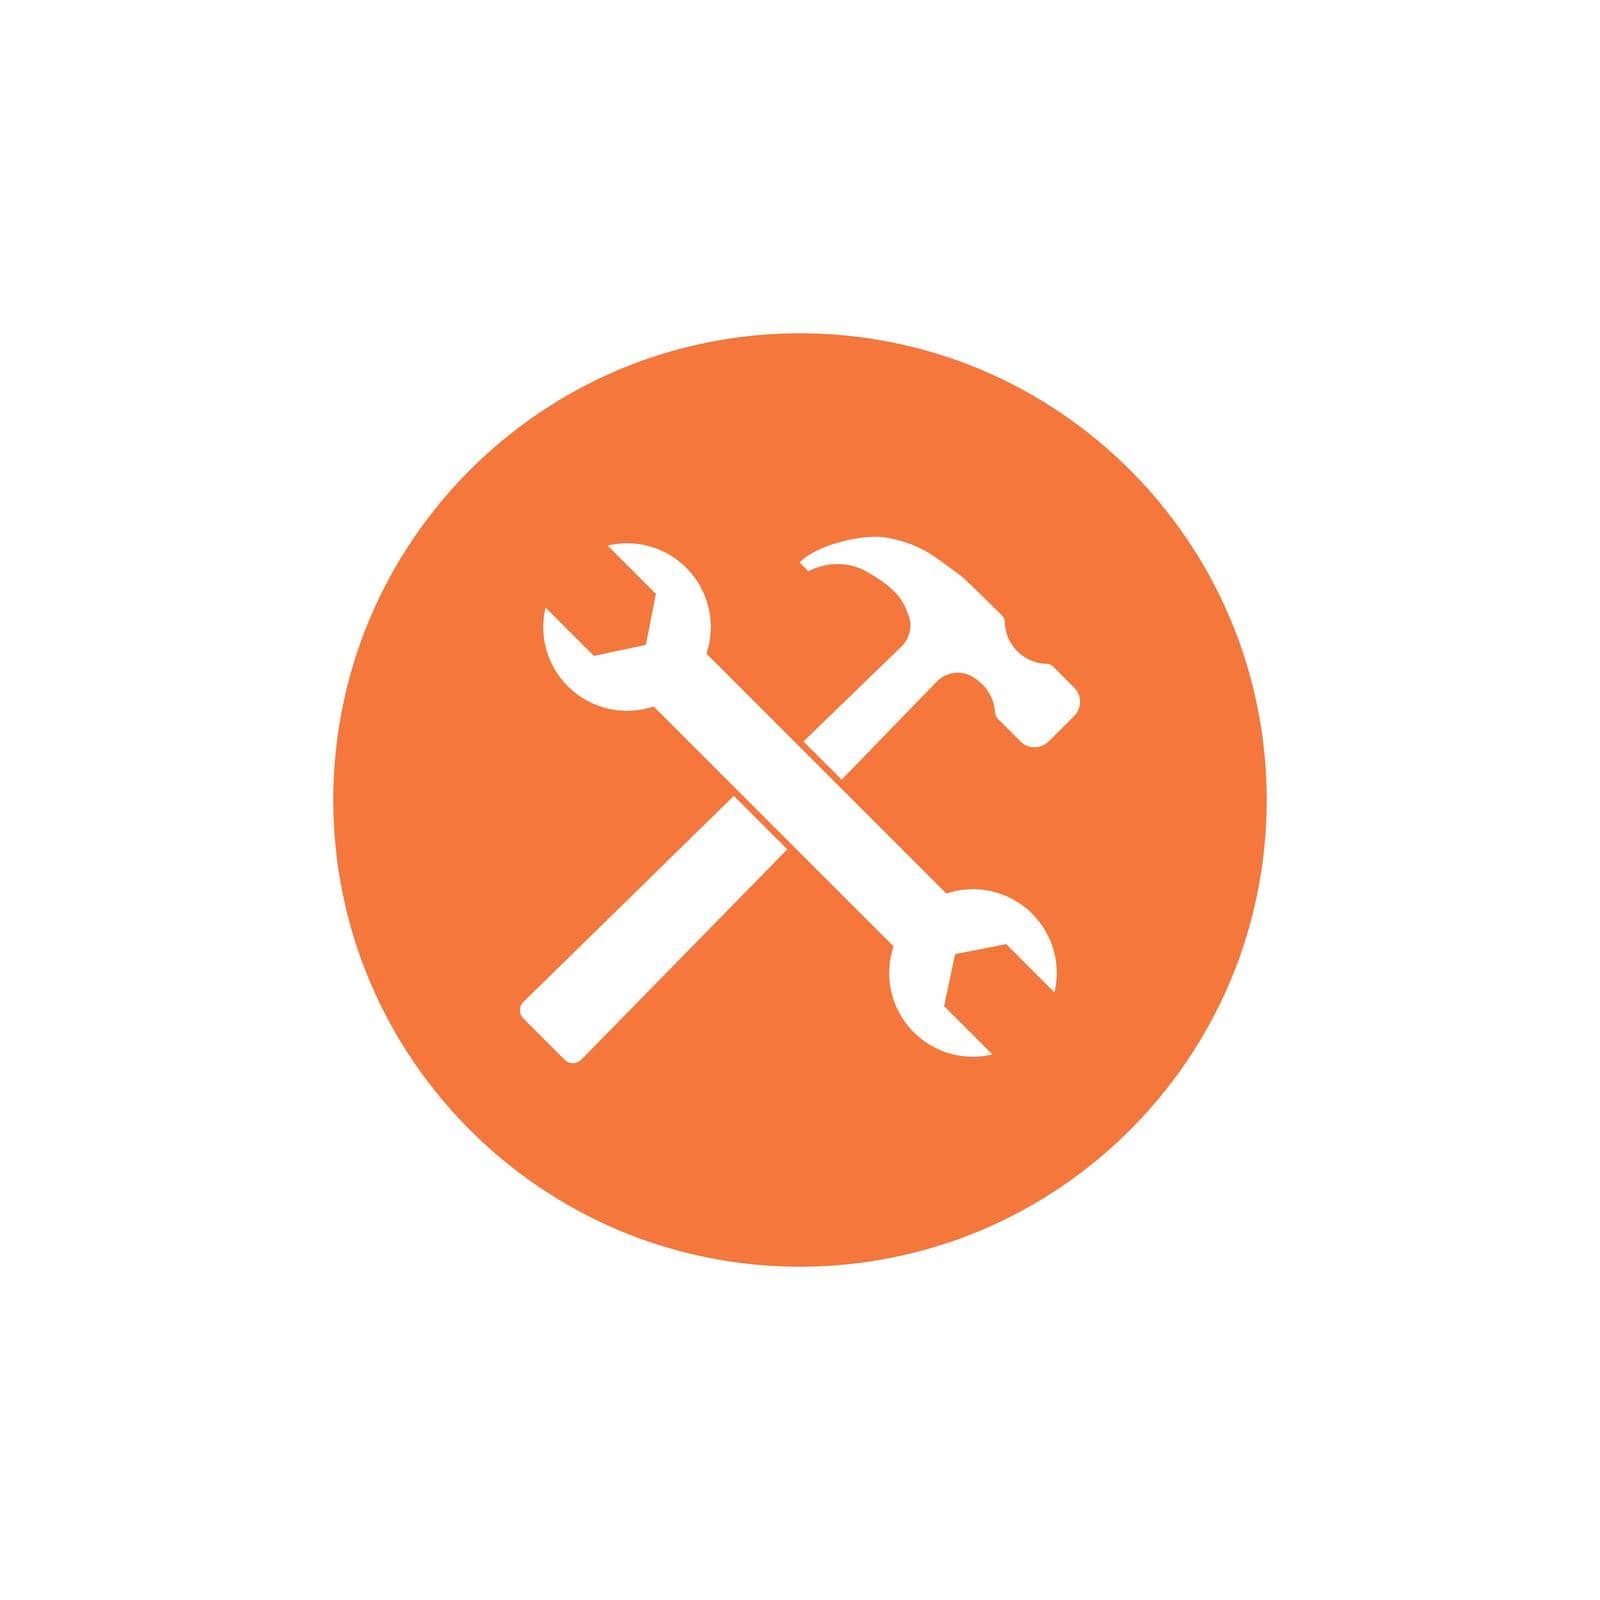 Hammer and wrench icon. Vector illustration, flat design. by Vertyb